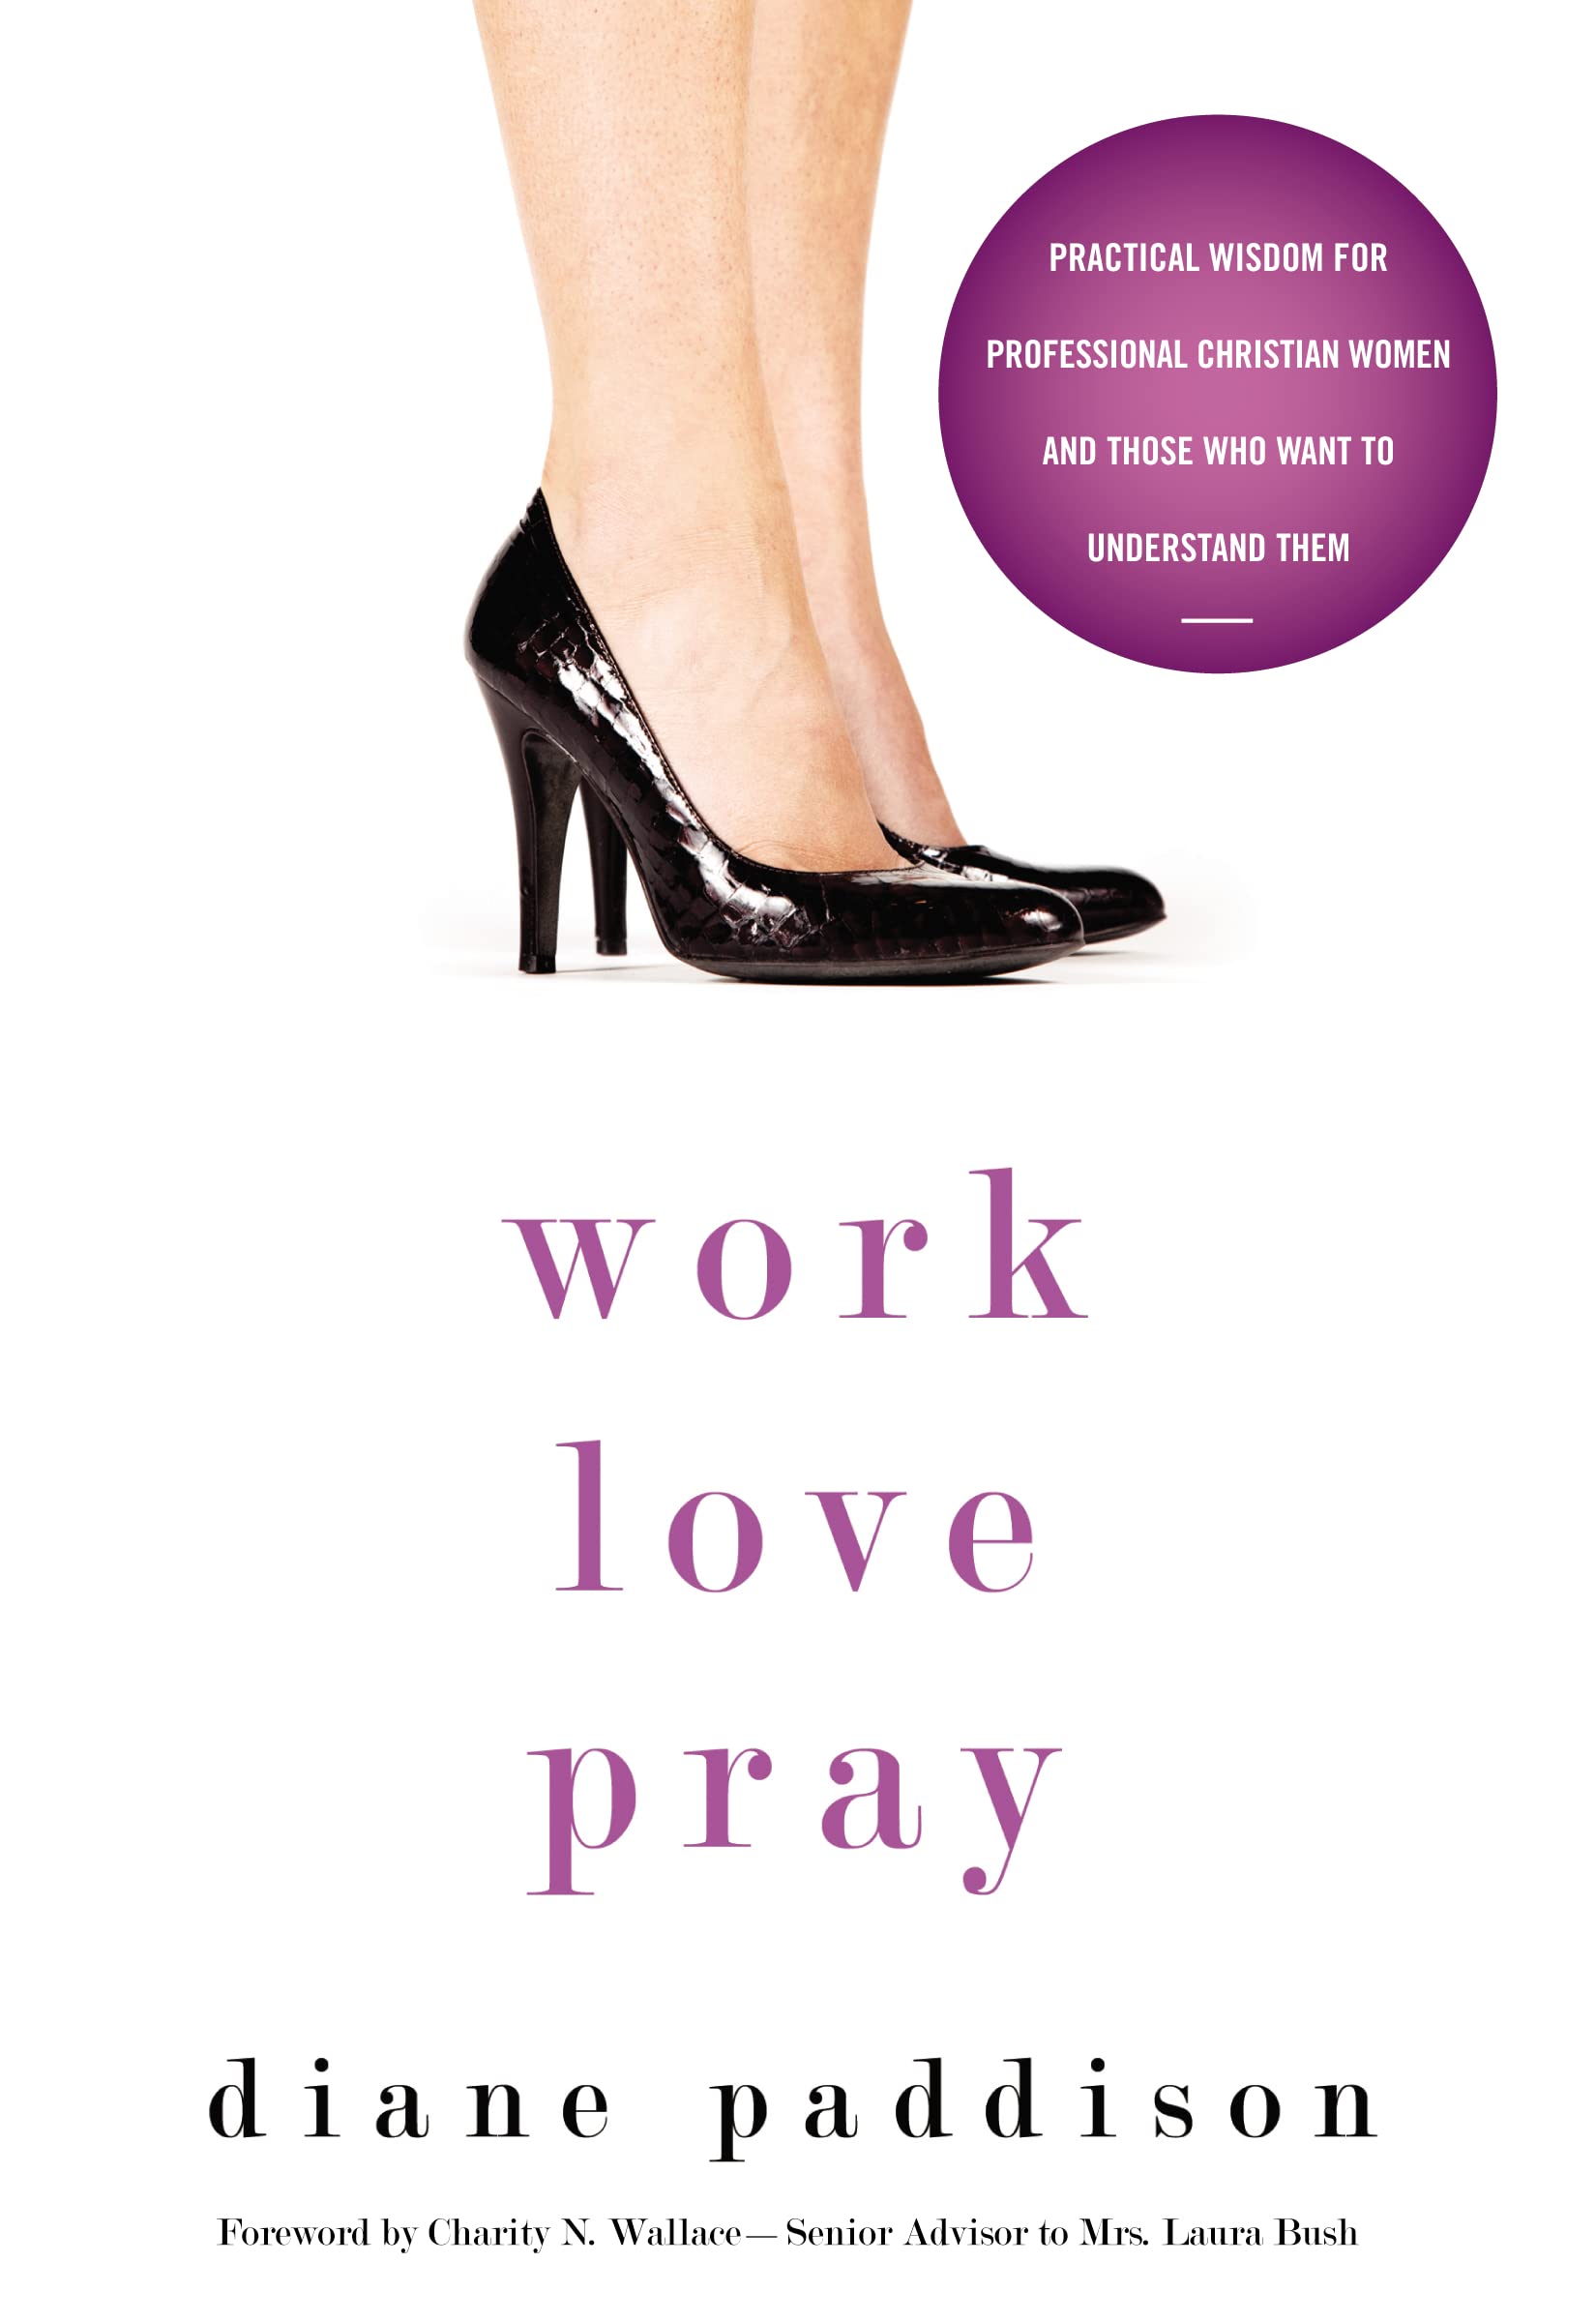 Work, Love, Pray: Practical Wisdom for Professional Christian Women and Those Who Want to Understand Them